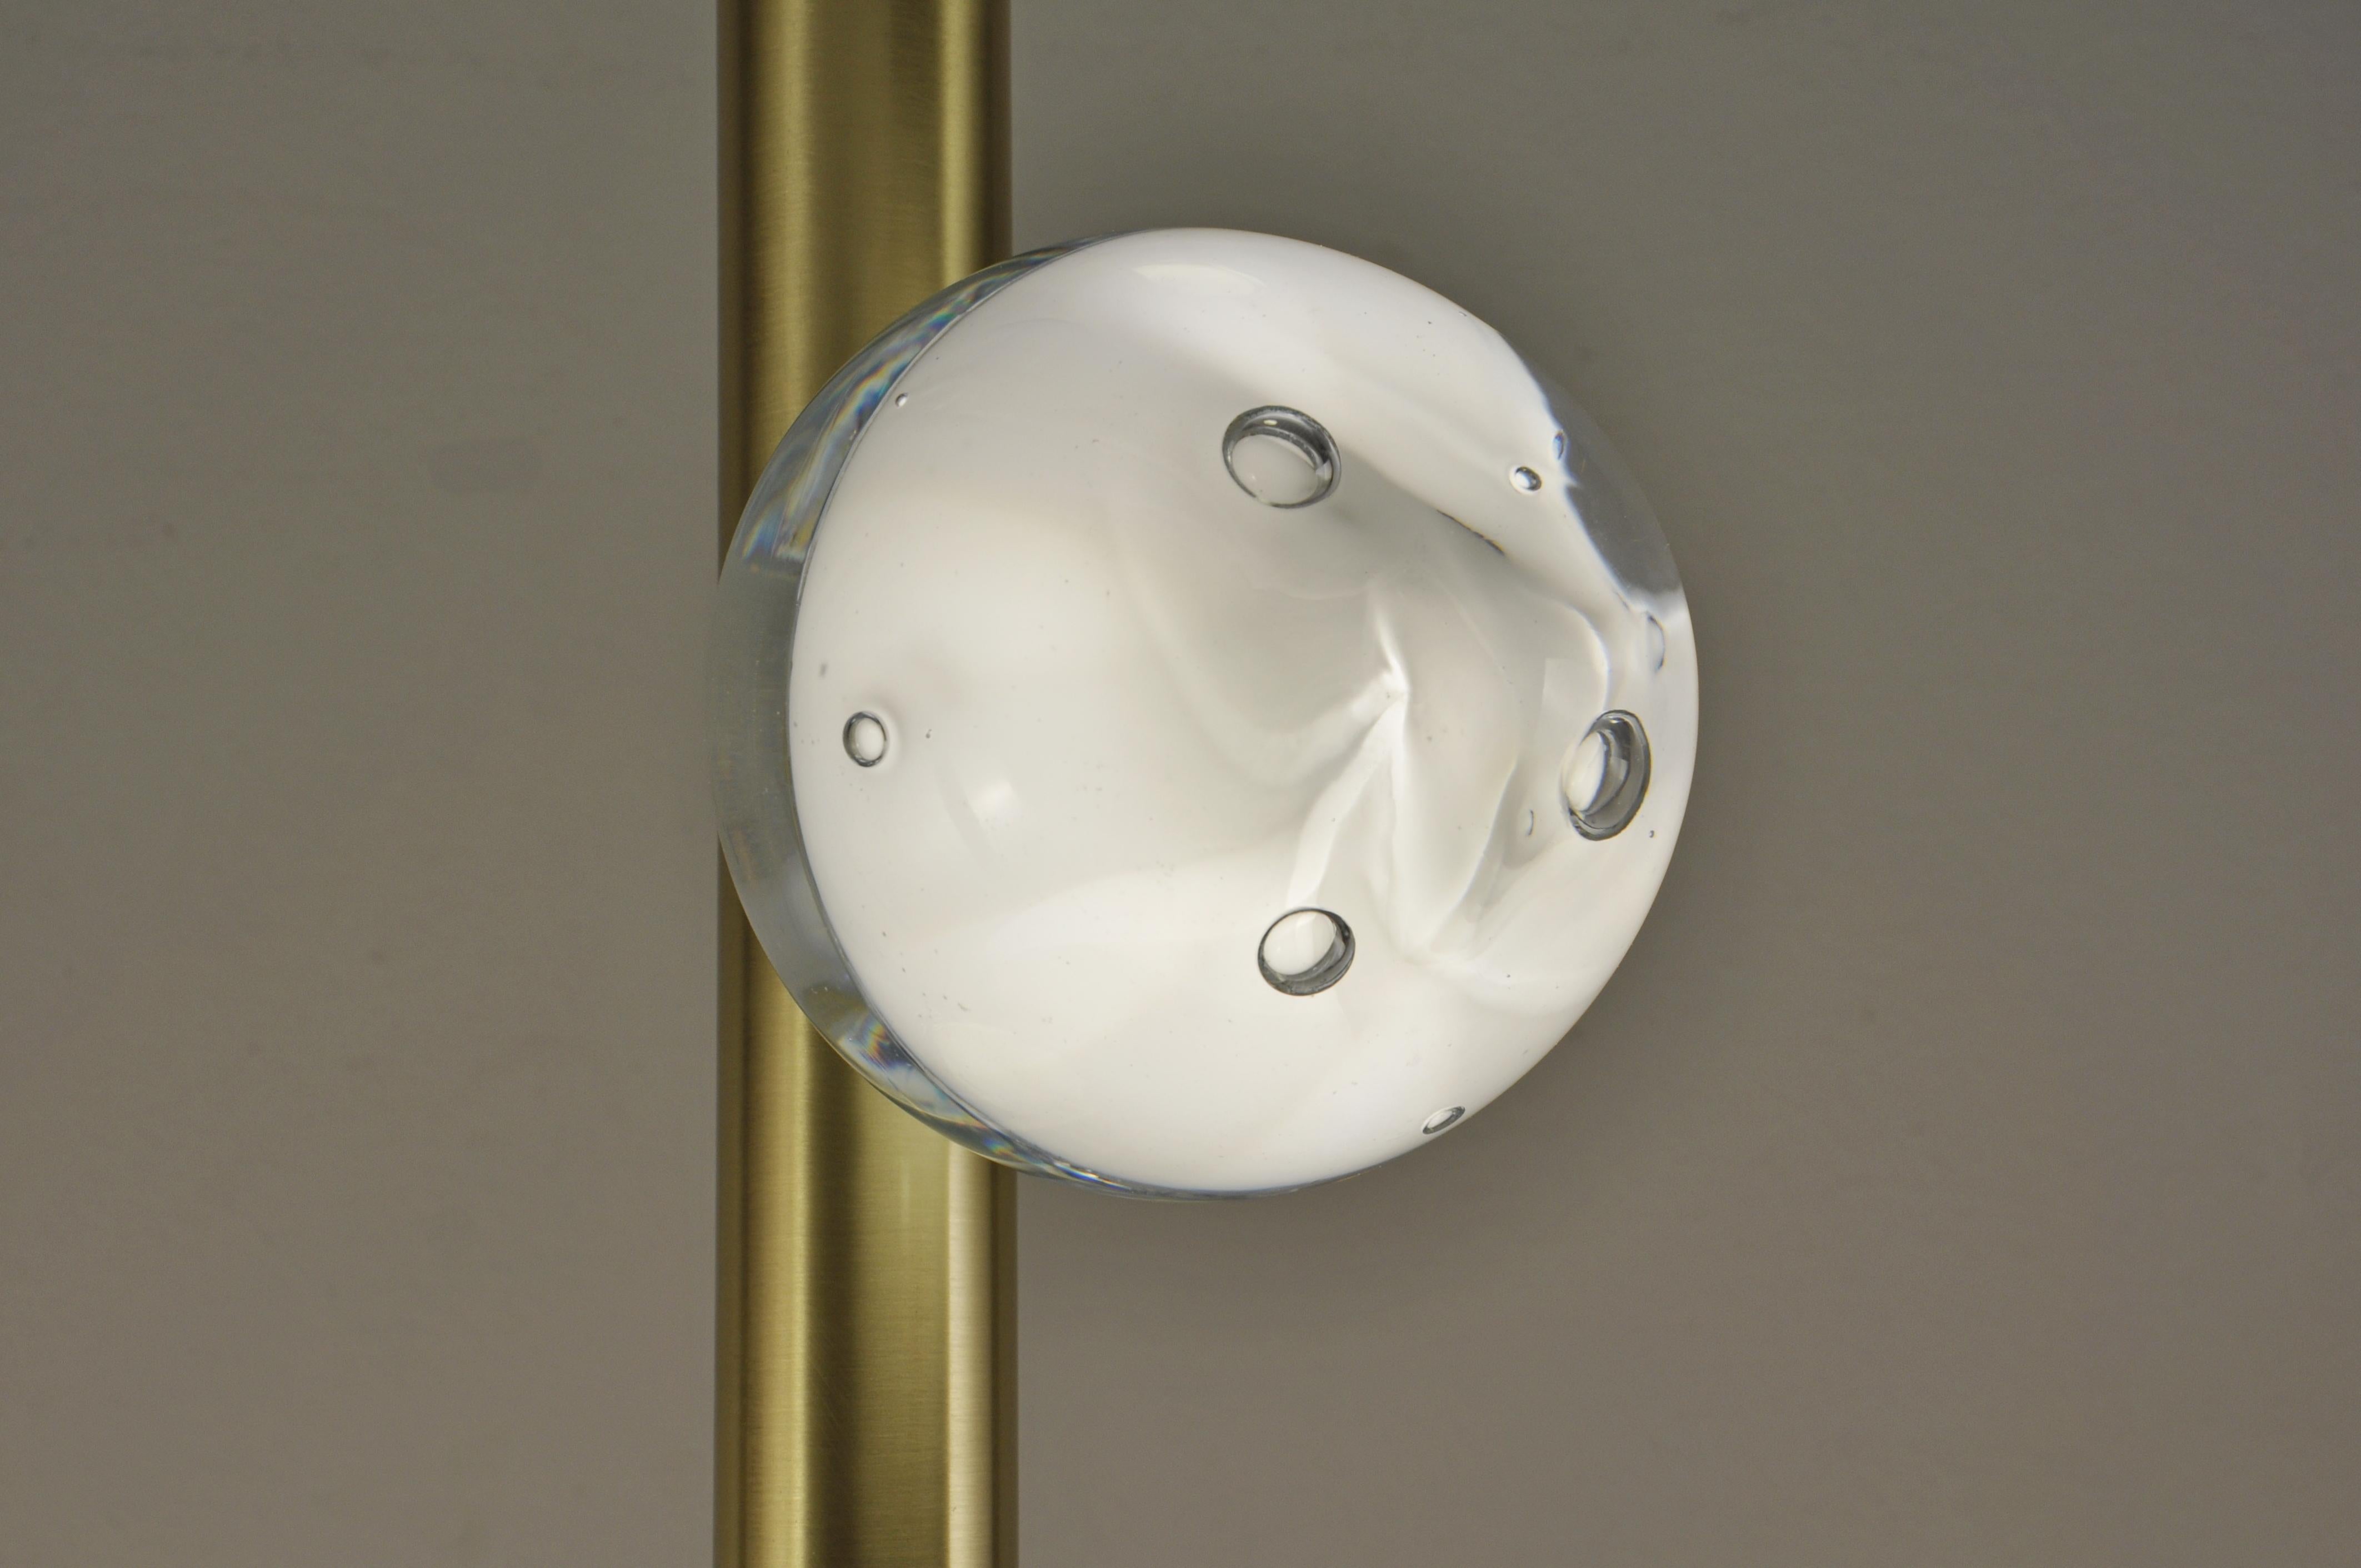 Suspension lamp with cylindrical structure in satin-finish brass, and crystals made by hand to contain the light source. Beams of direct light are emitted at the two extremities.